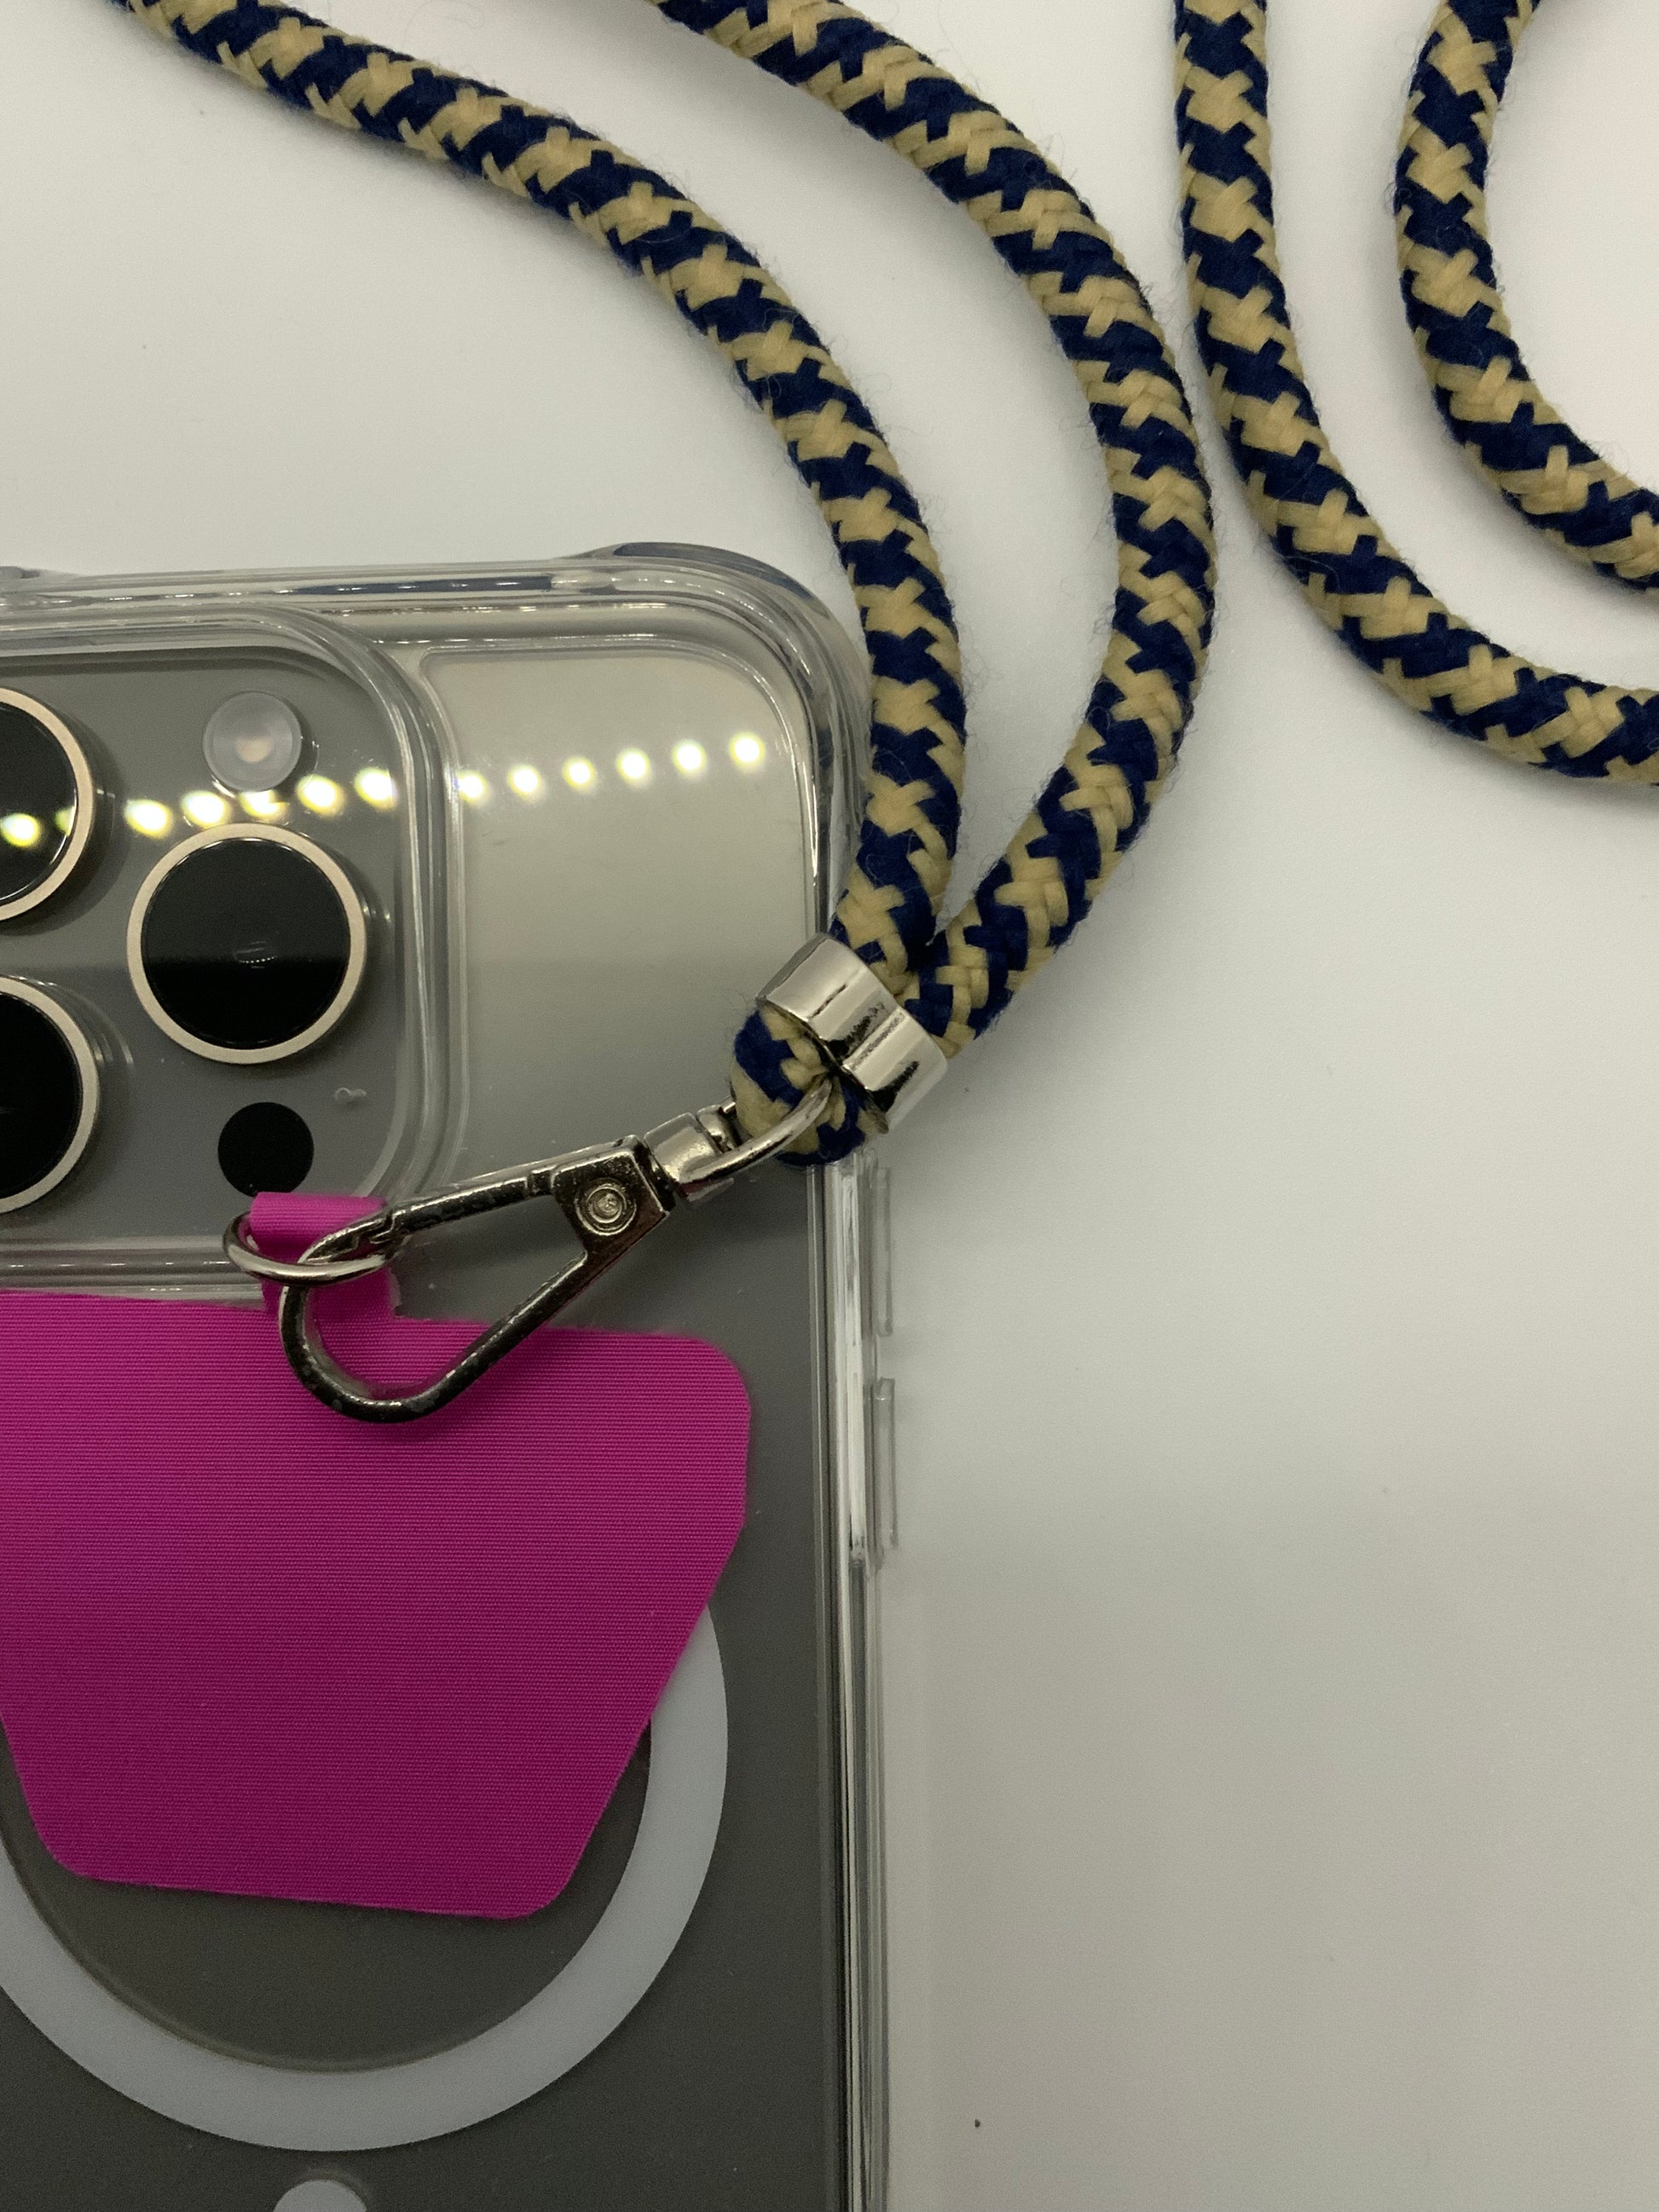 Be My AI: The picture shows a clear phone case with a lanyard attached to it. The phone case appears to be for an iPhone with three camera lenses and a flash. The lanyard is made of a braided fabric in a pattern of alternating blue and beige colors. The lanyard is attached to the phone case through a silver metal clasp. There is also a pink card or tag attached to the back of the phone case. The background of the picture is white.